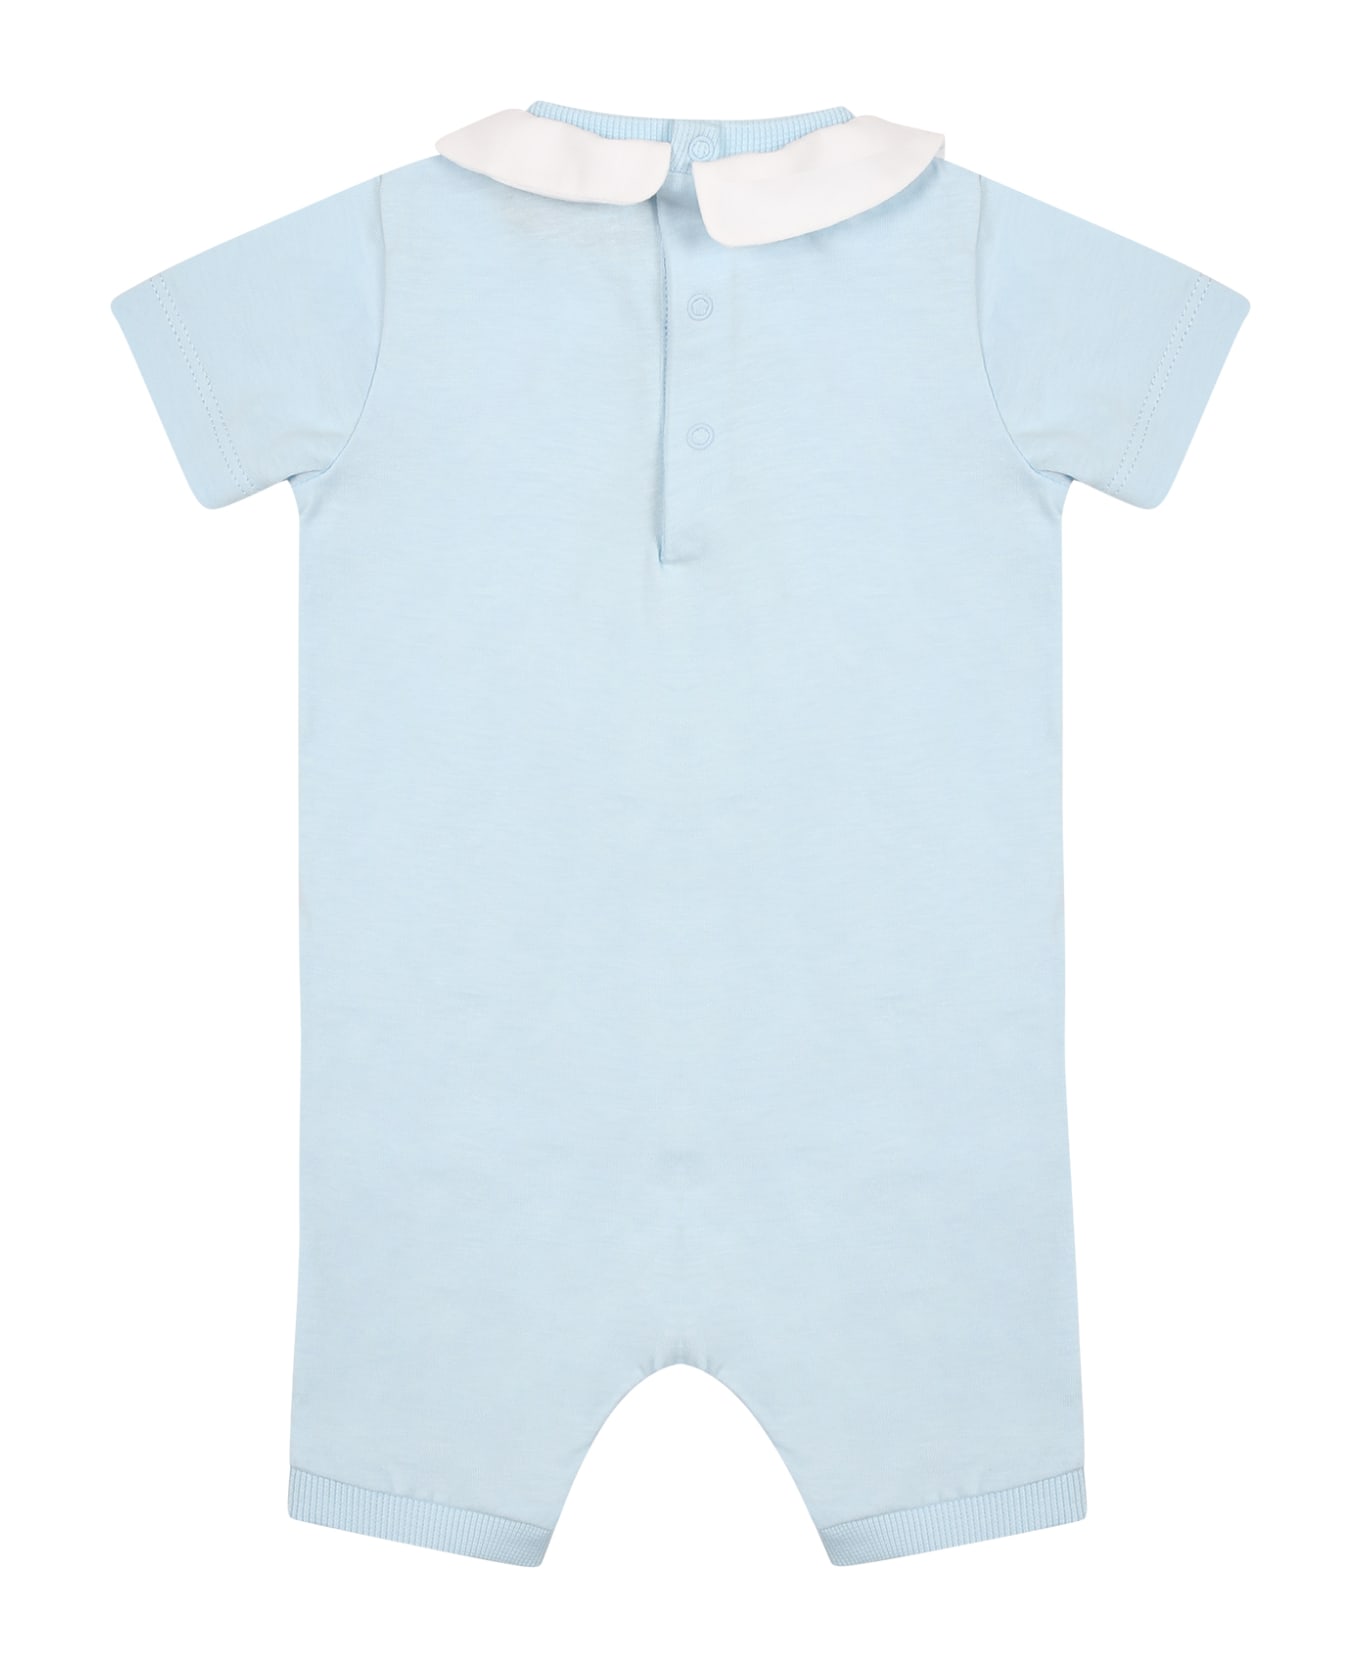 Moschino Light Blue Romper For Baby Boy With Teddy Bear And Logo - Light Blue